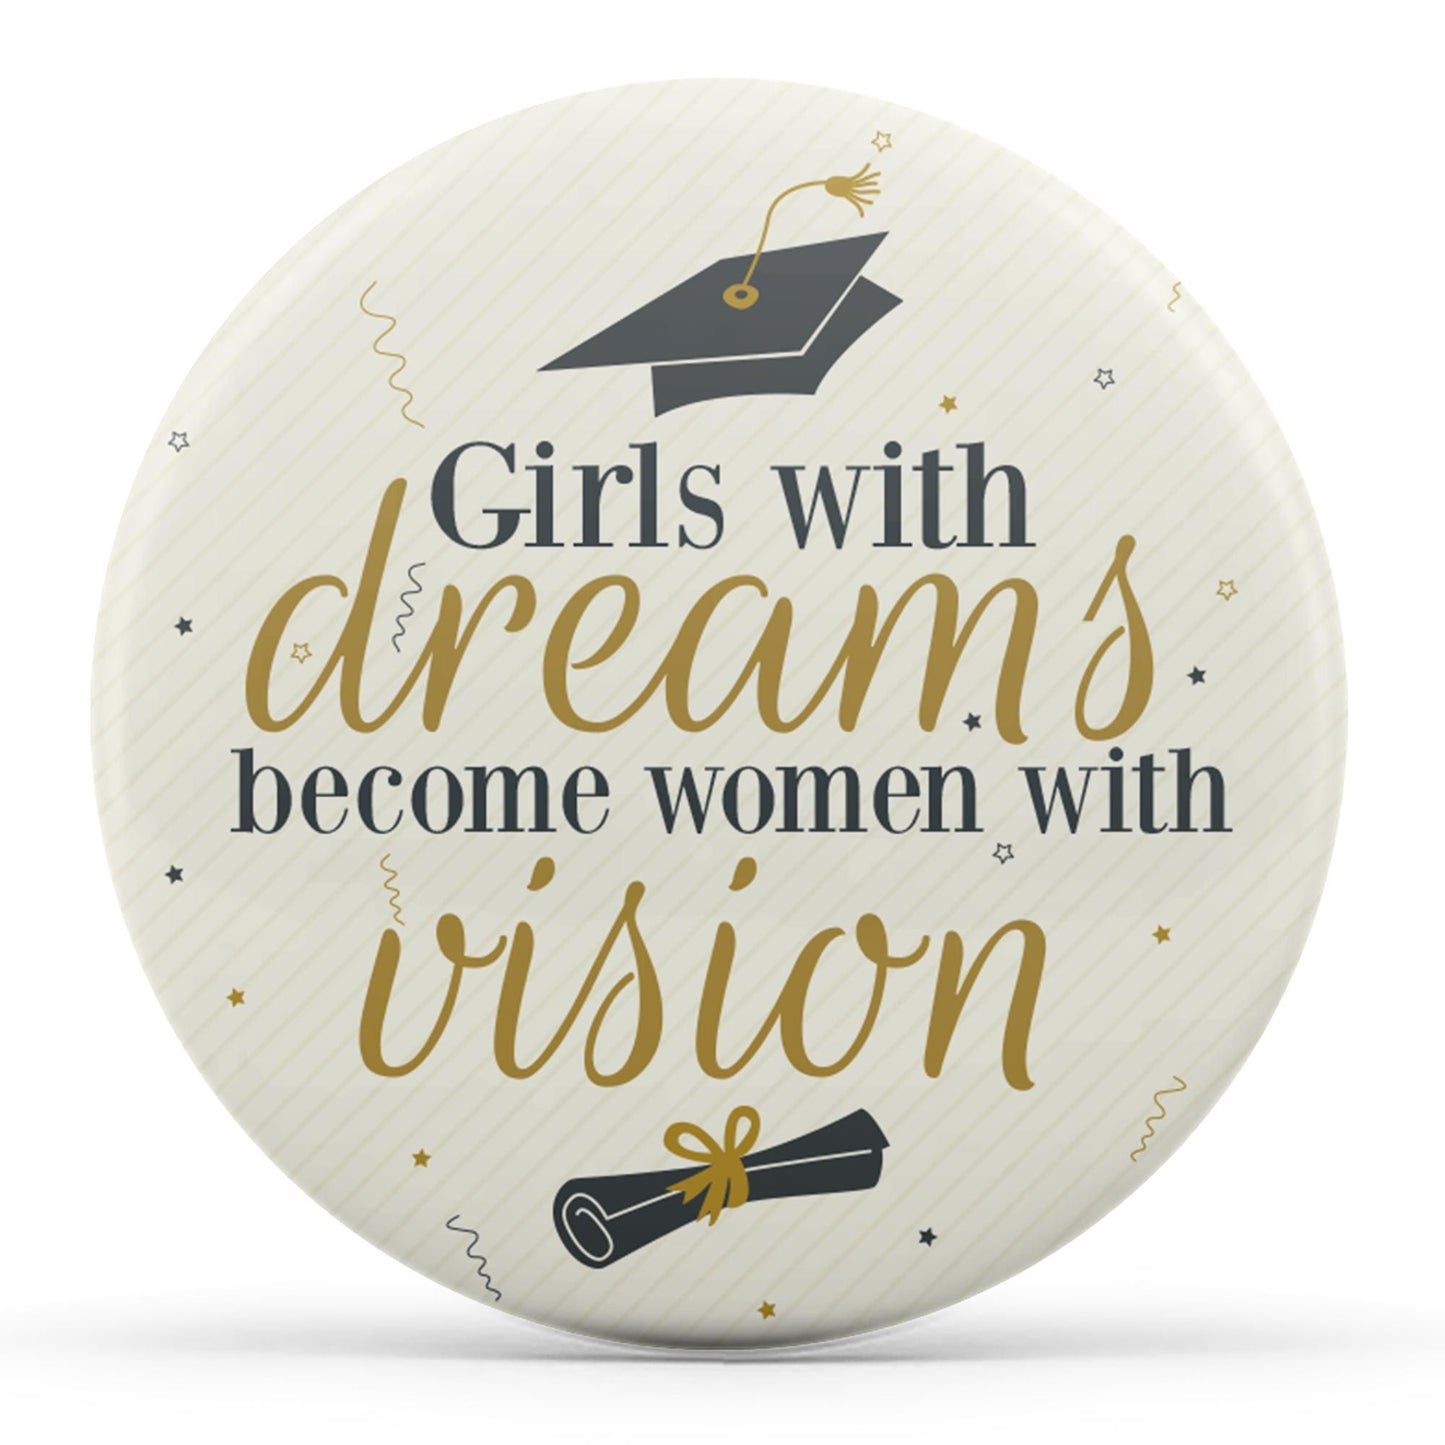 Girls With Dreams Become Women With Vision Image